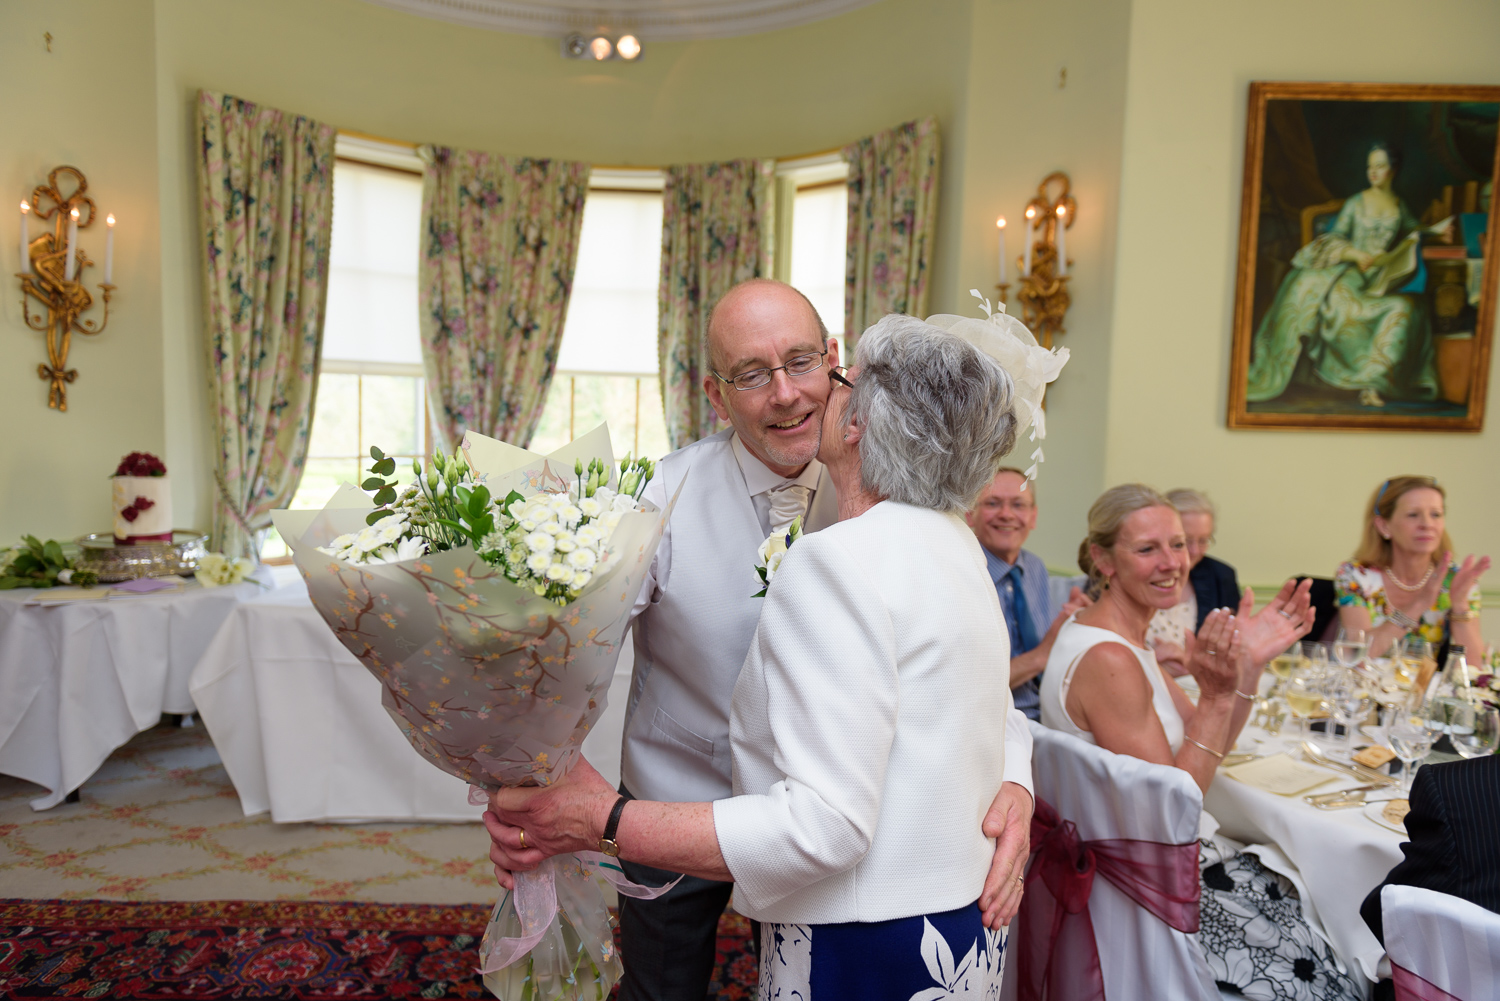 exchanging gifts at hassop hall wedding